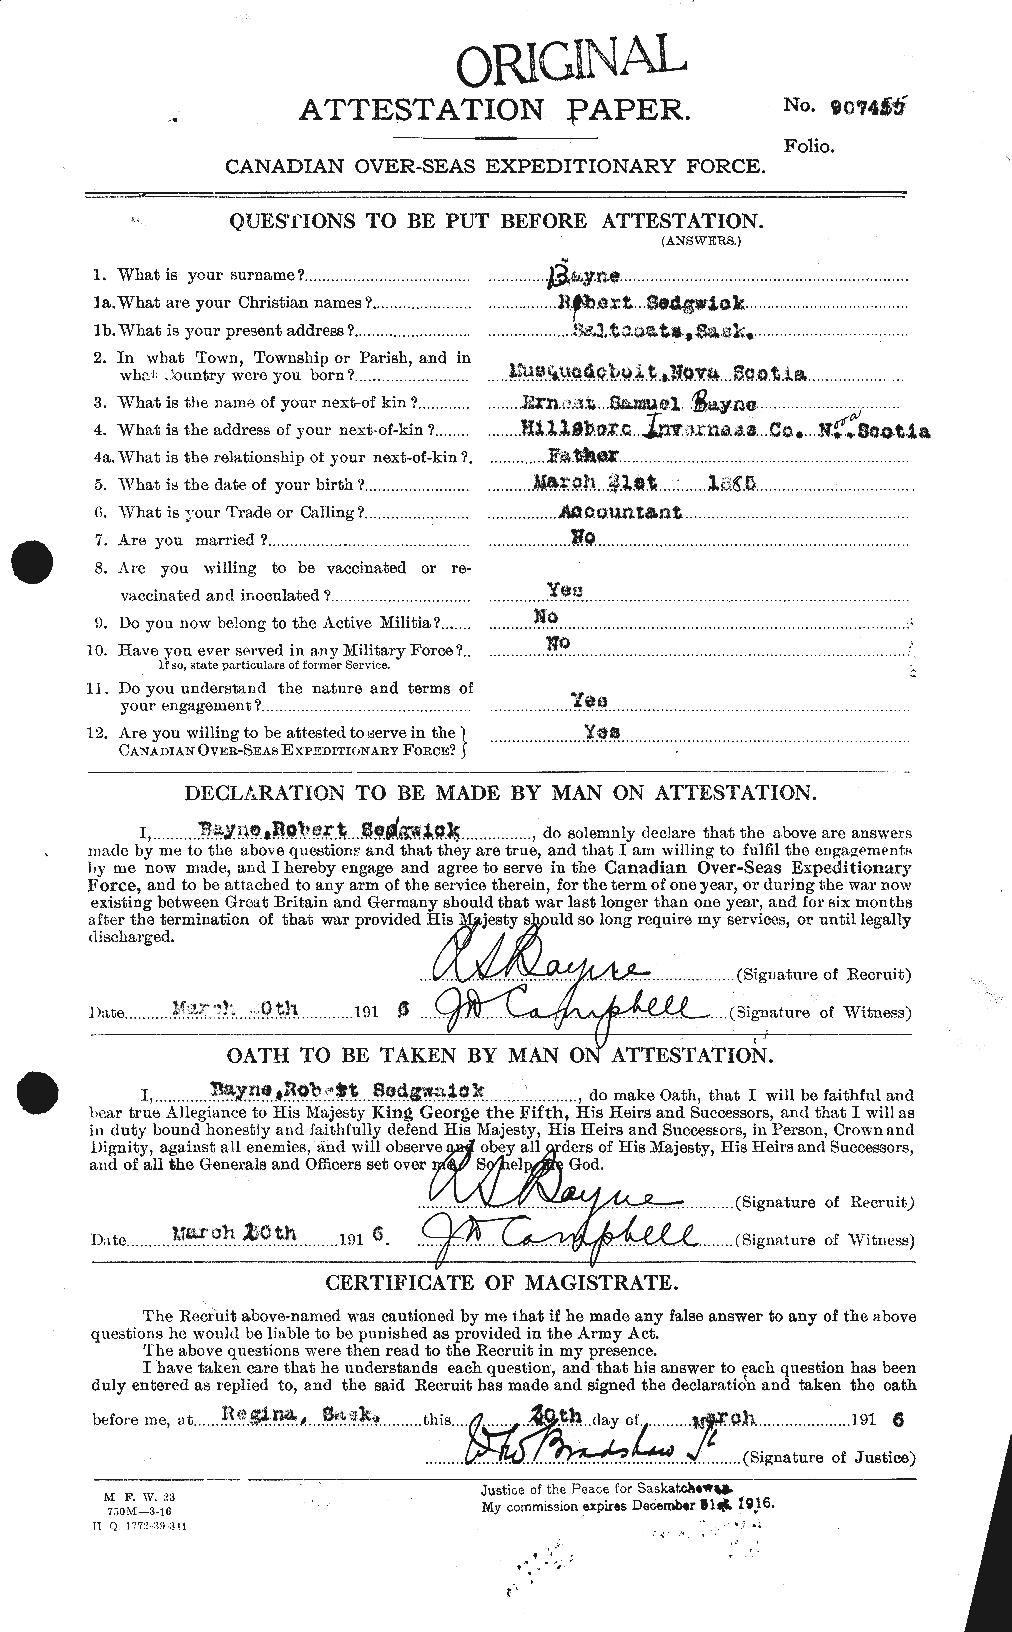 Personnel Records of the First World War - CEF 229774a